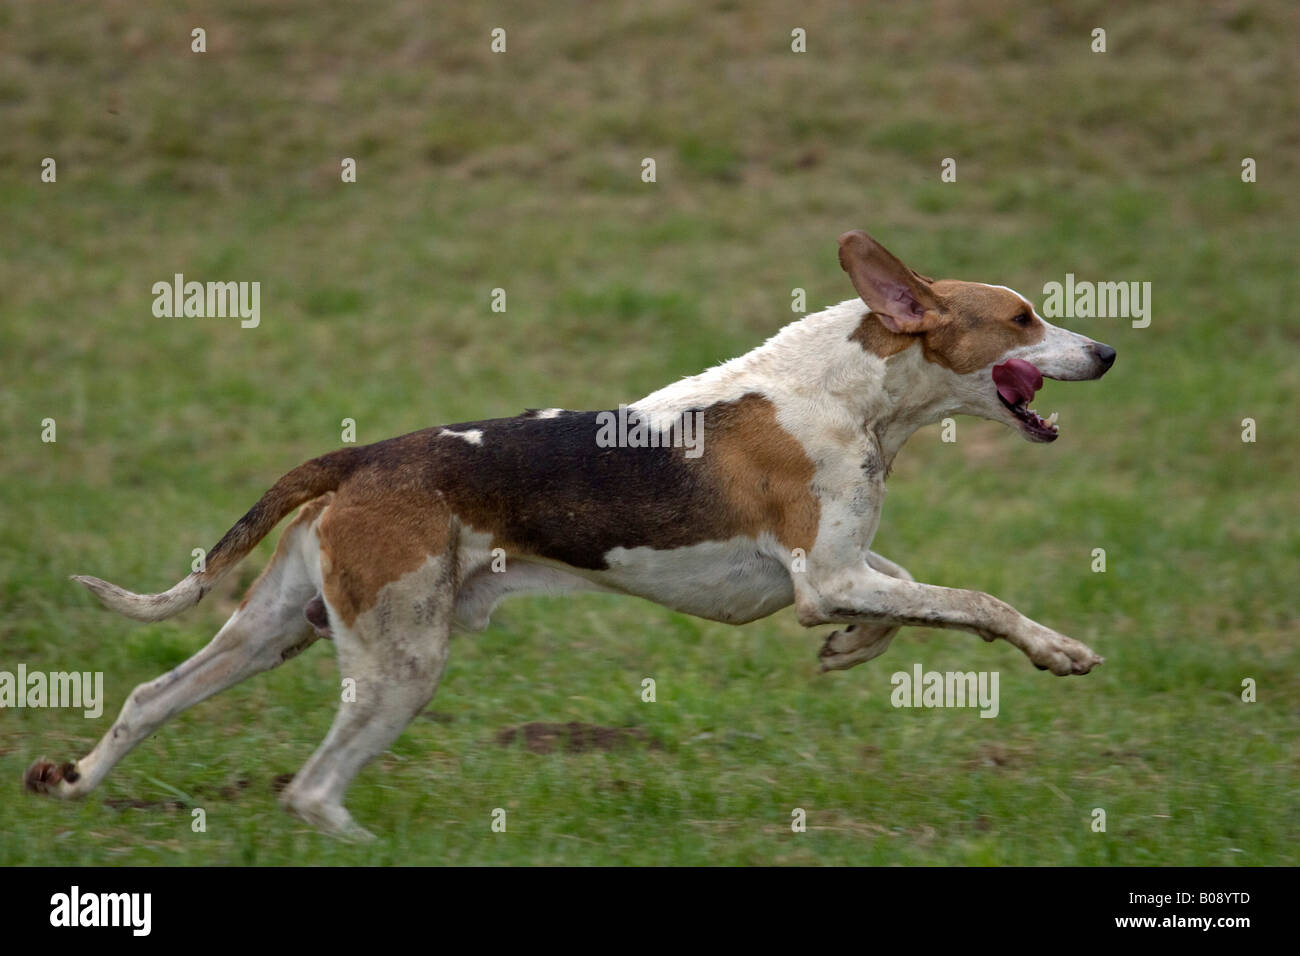 Grand Anglo Francais Tricolore Hound Hunting Dog Stock Photo Alamy